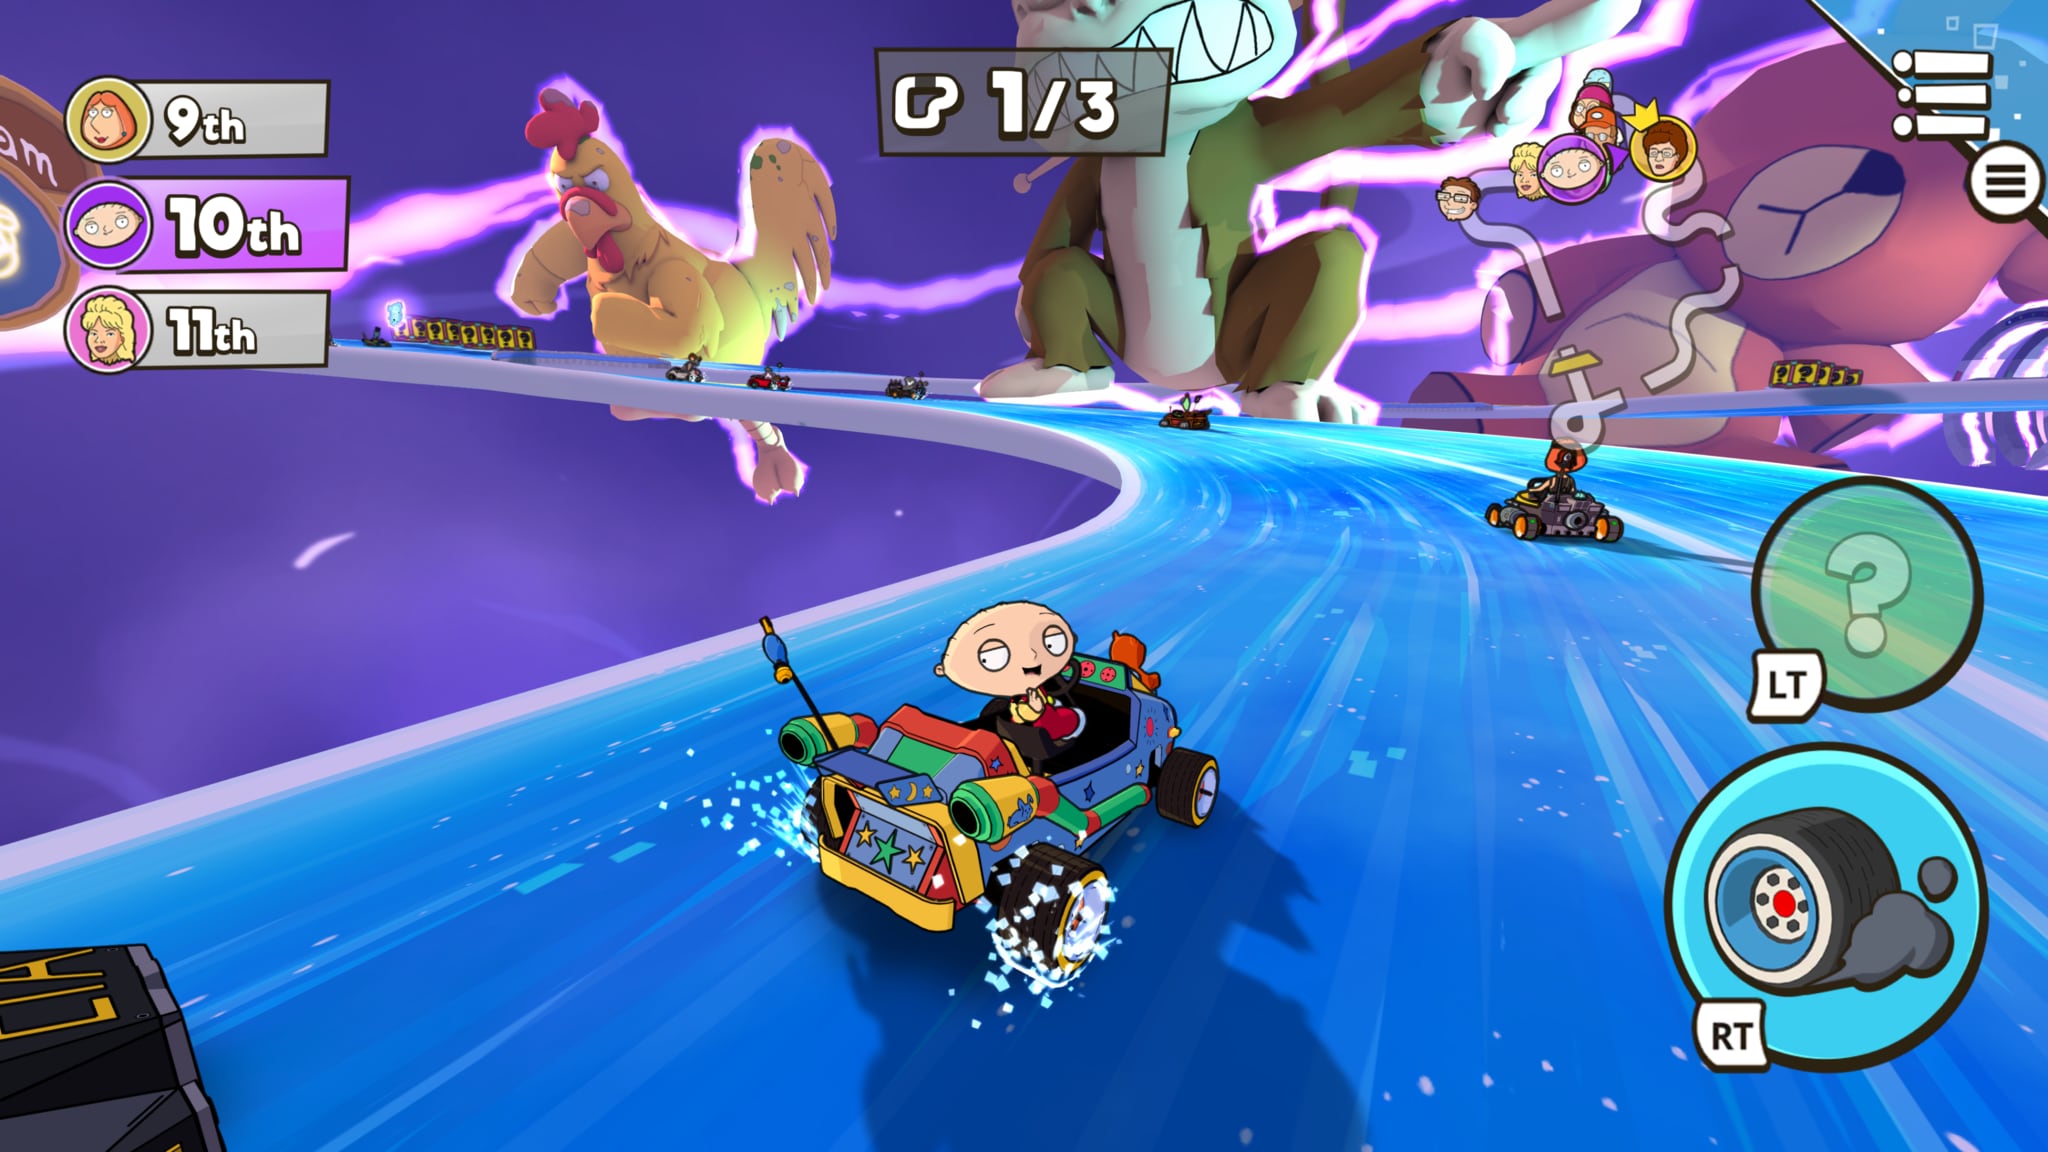 Apple Arcade Gains New Warped Kart Racers Game Featuring Characters From ‘Family Guy’ and ‘King of the Hill’